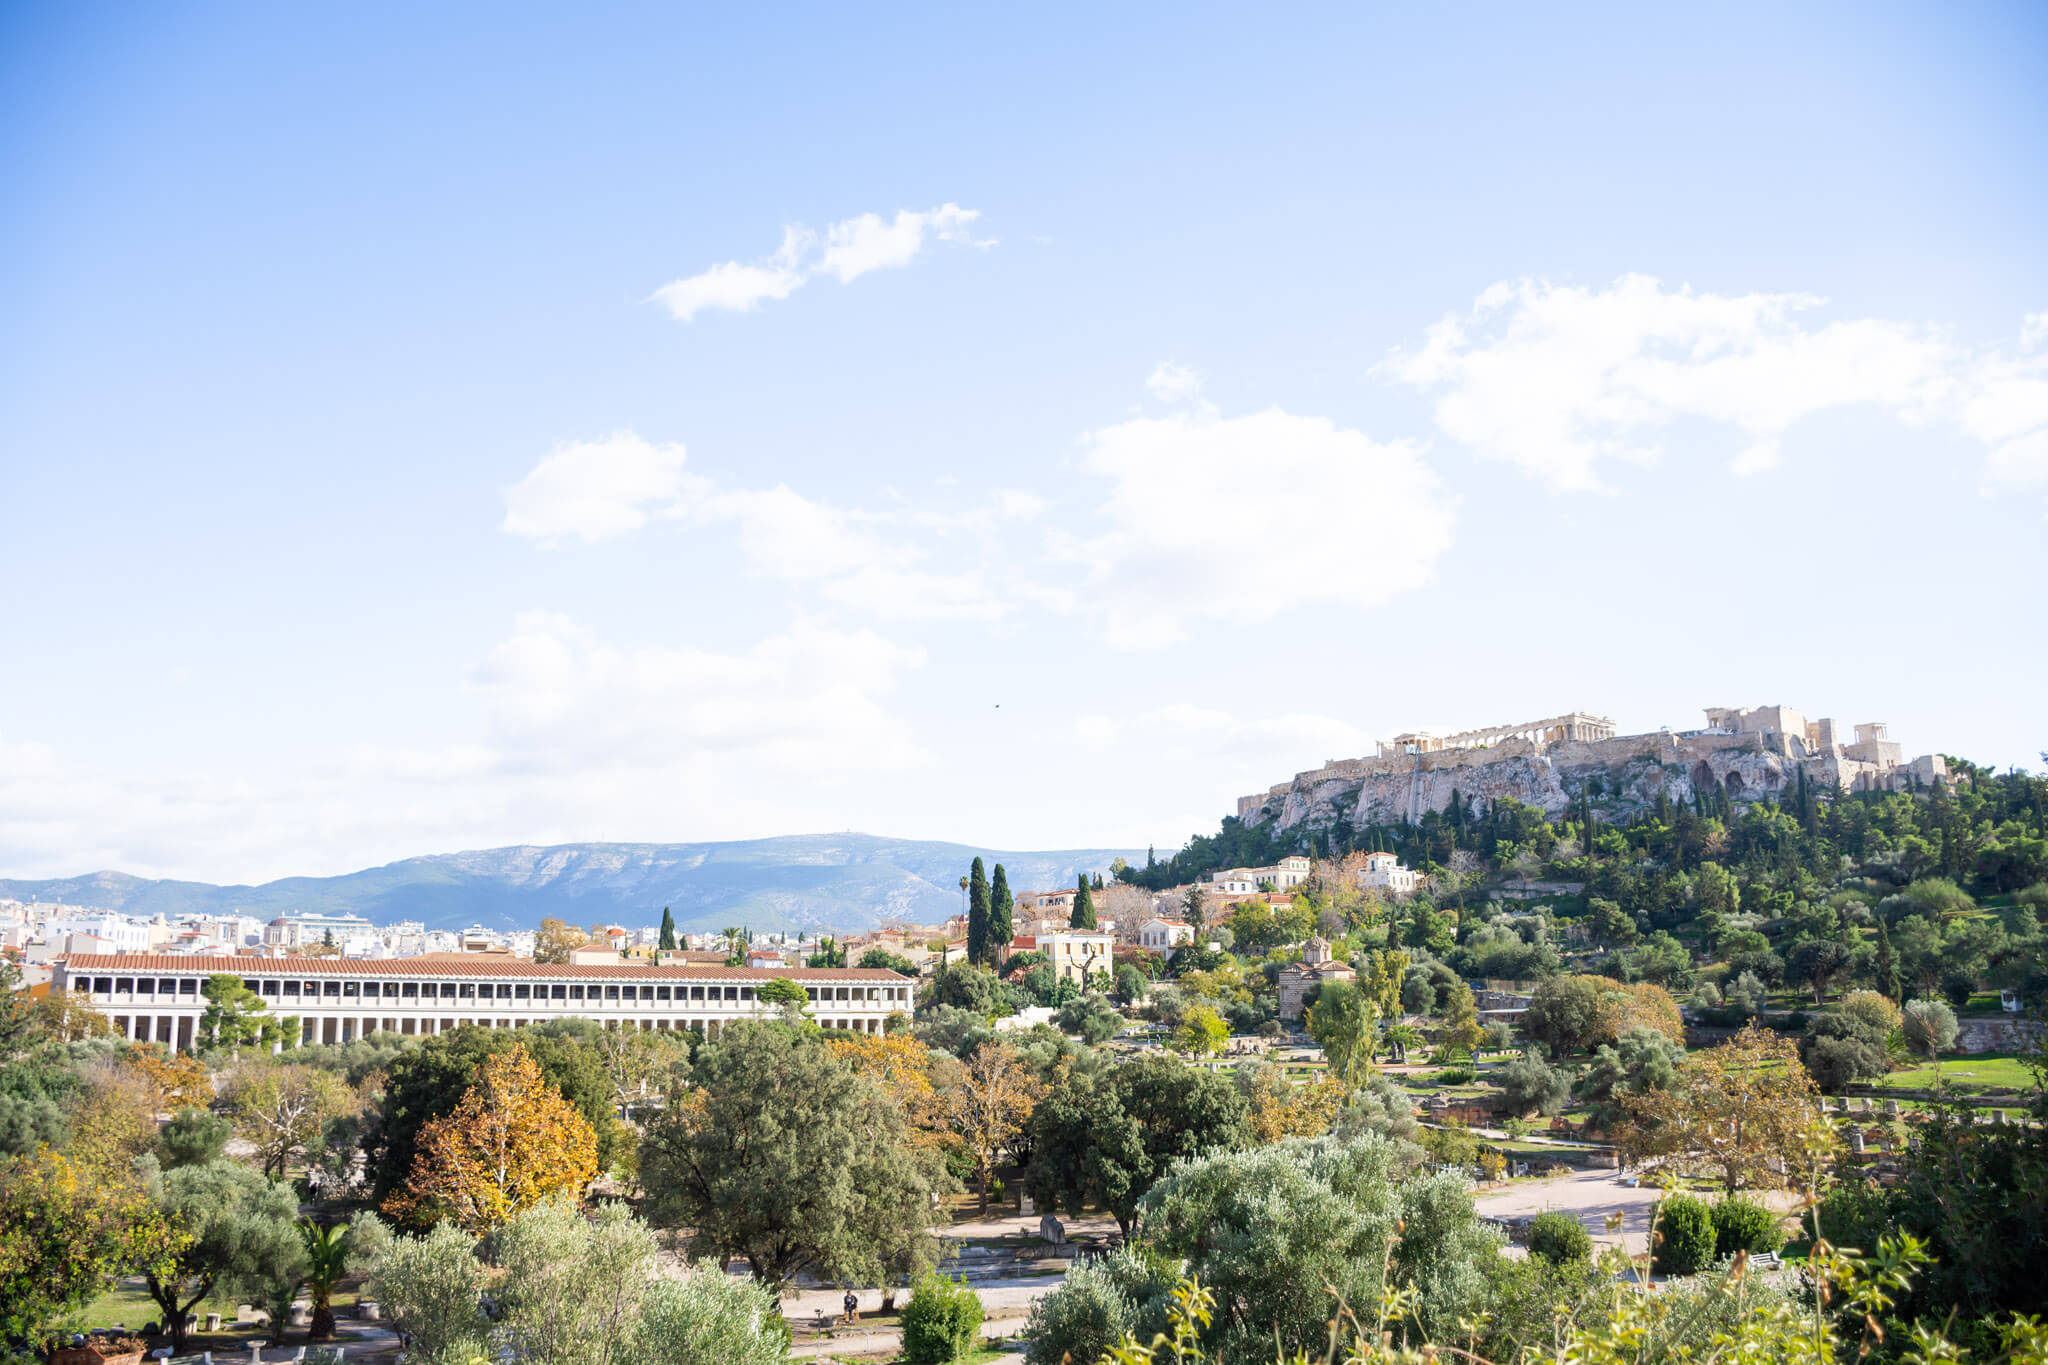 View of the Acropolis at the Ancient Greek Agora